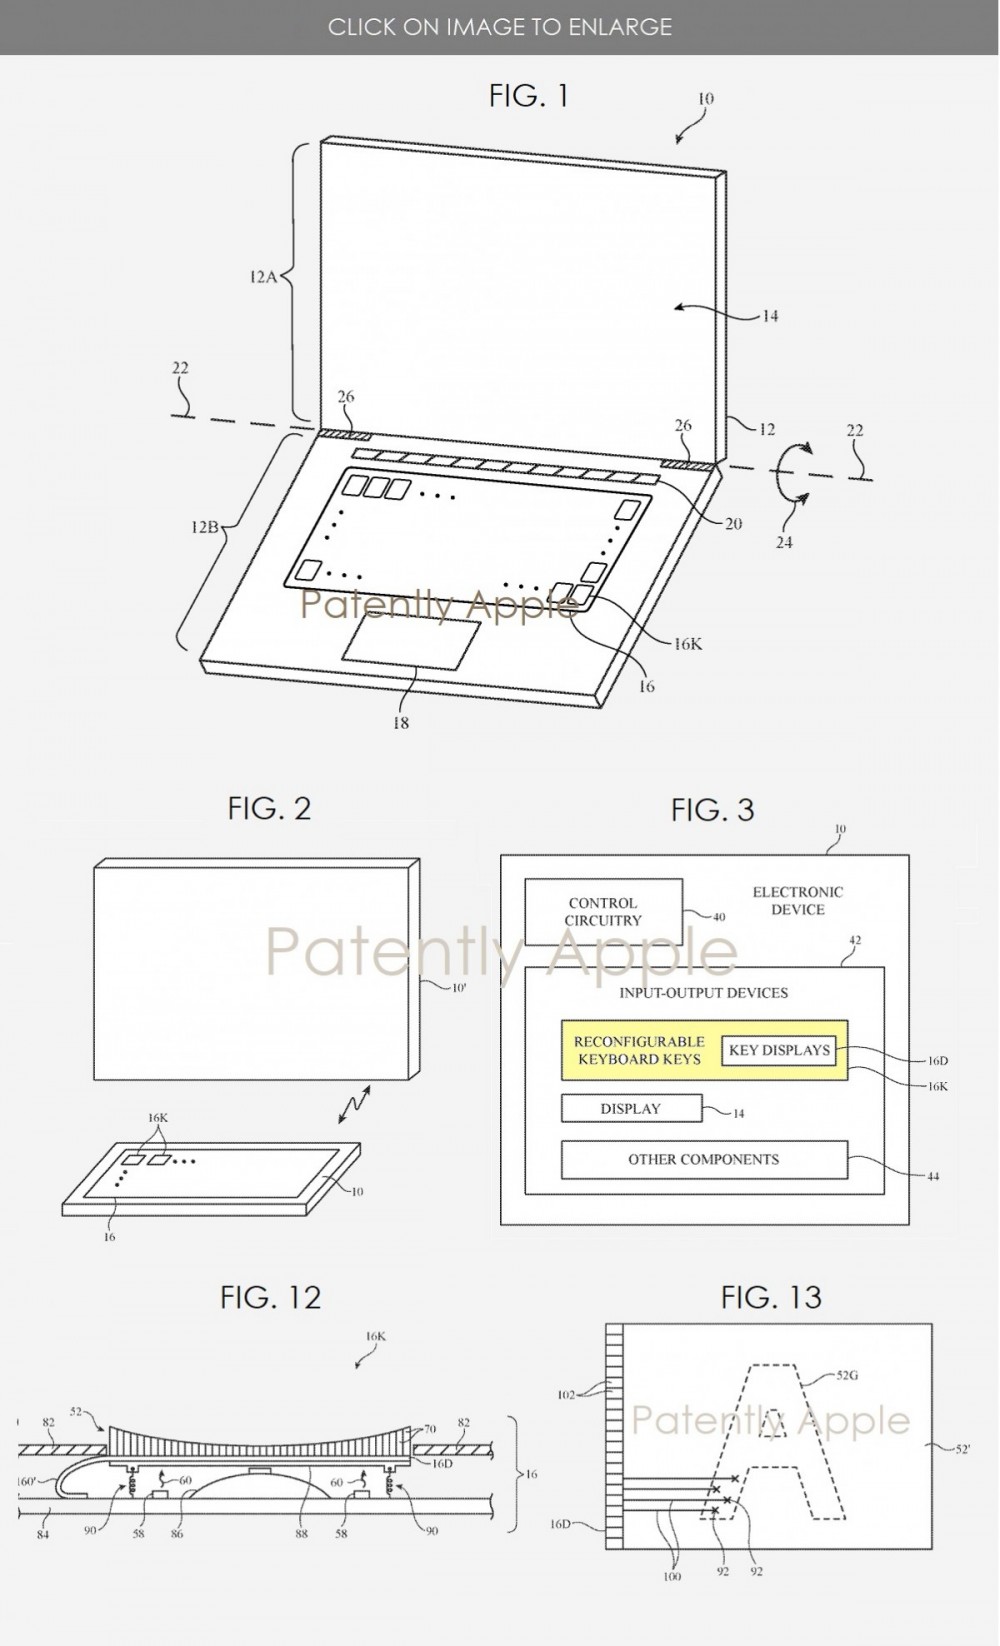 Apple patents a Mac keyboard with configurable keys that use tiny displays